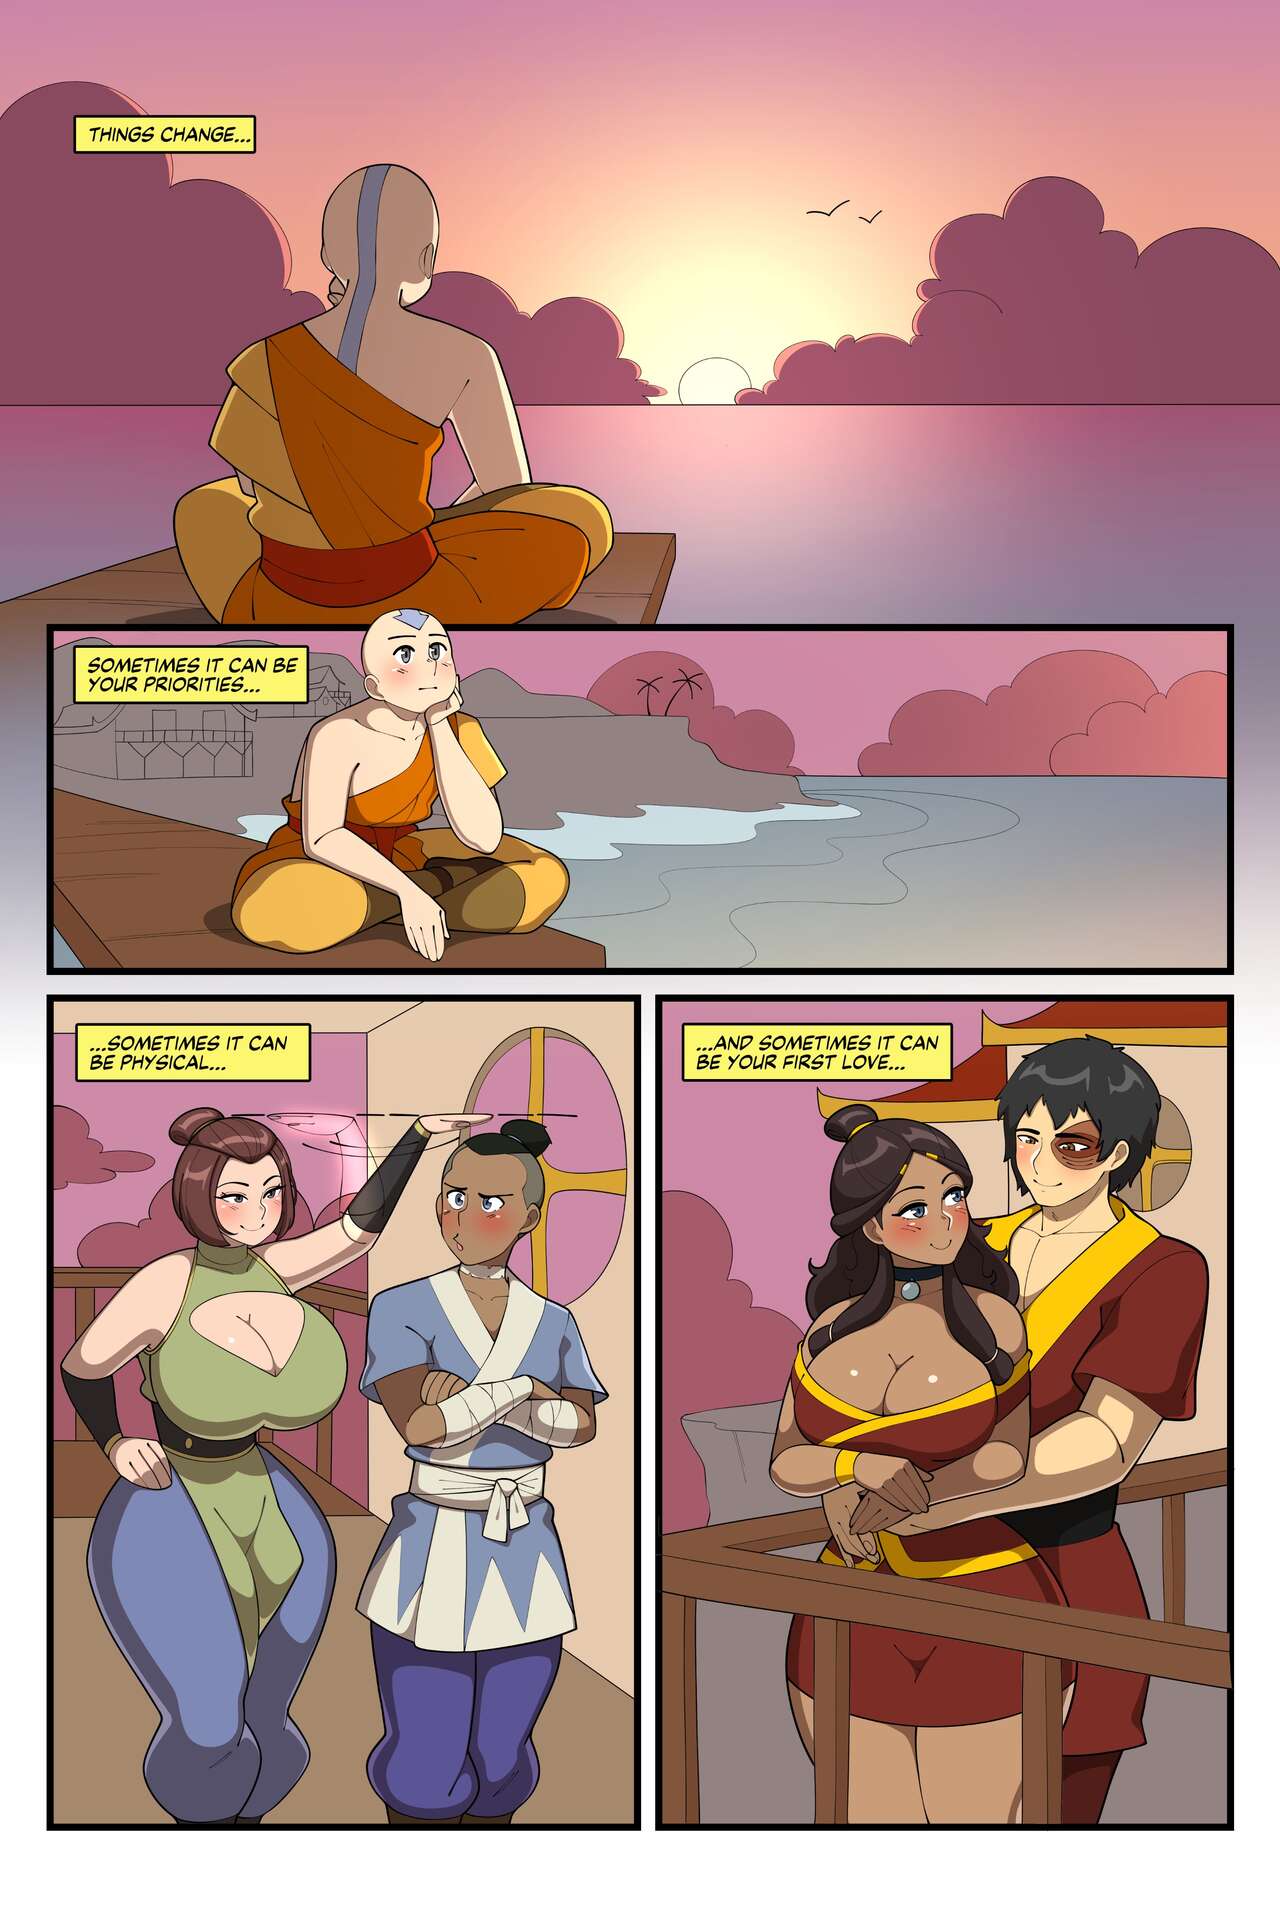 Airbender Lesbian Hentai - TheCoolIdeaGuy] Growing Pains (Avatar: the Last Airbender) - FreeAdultComix